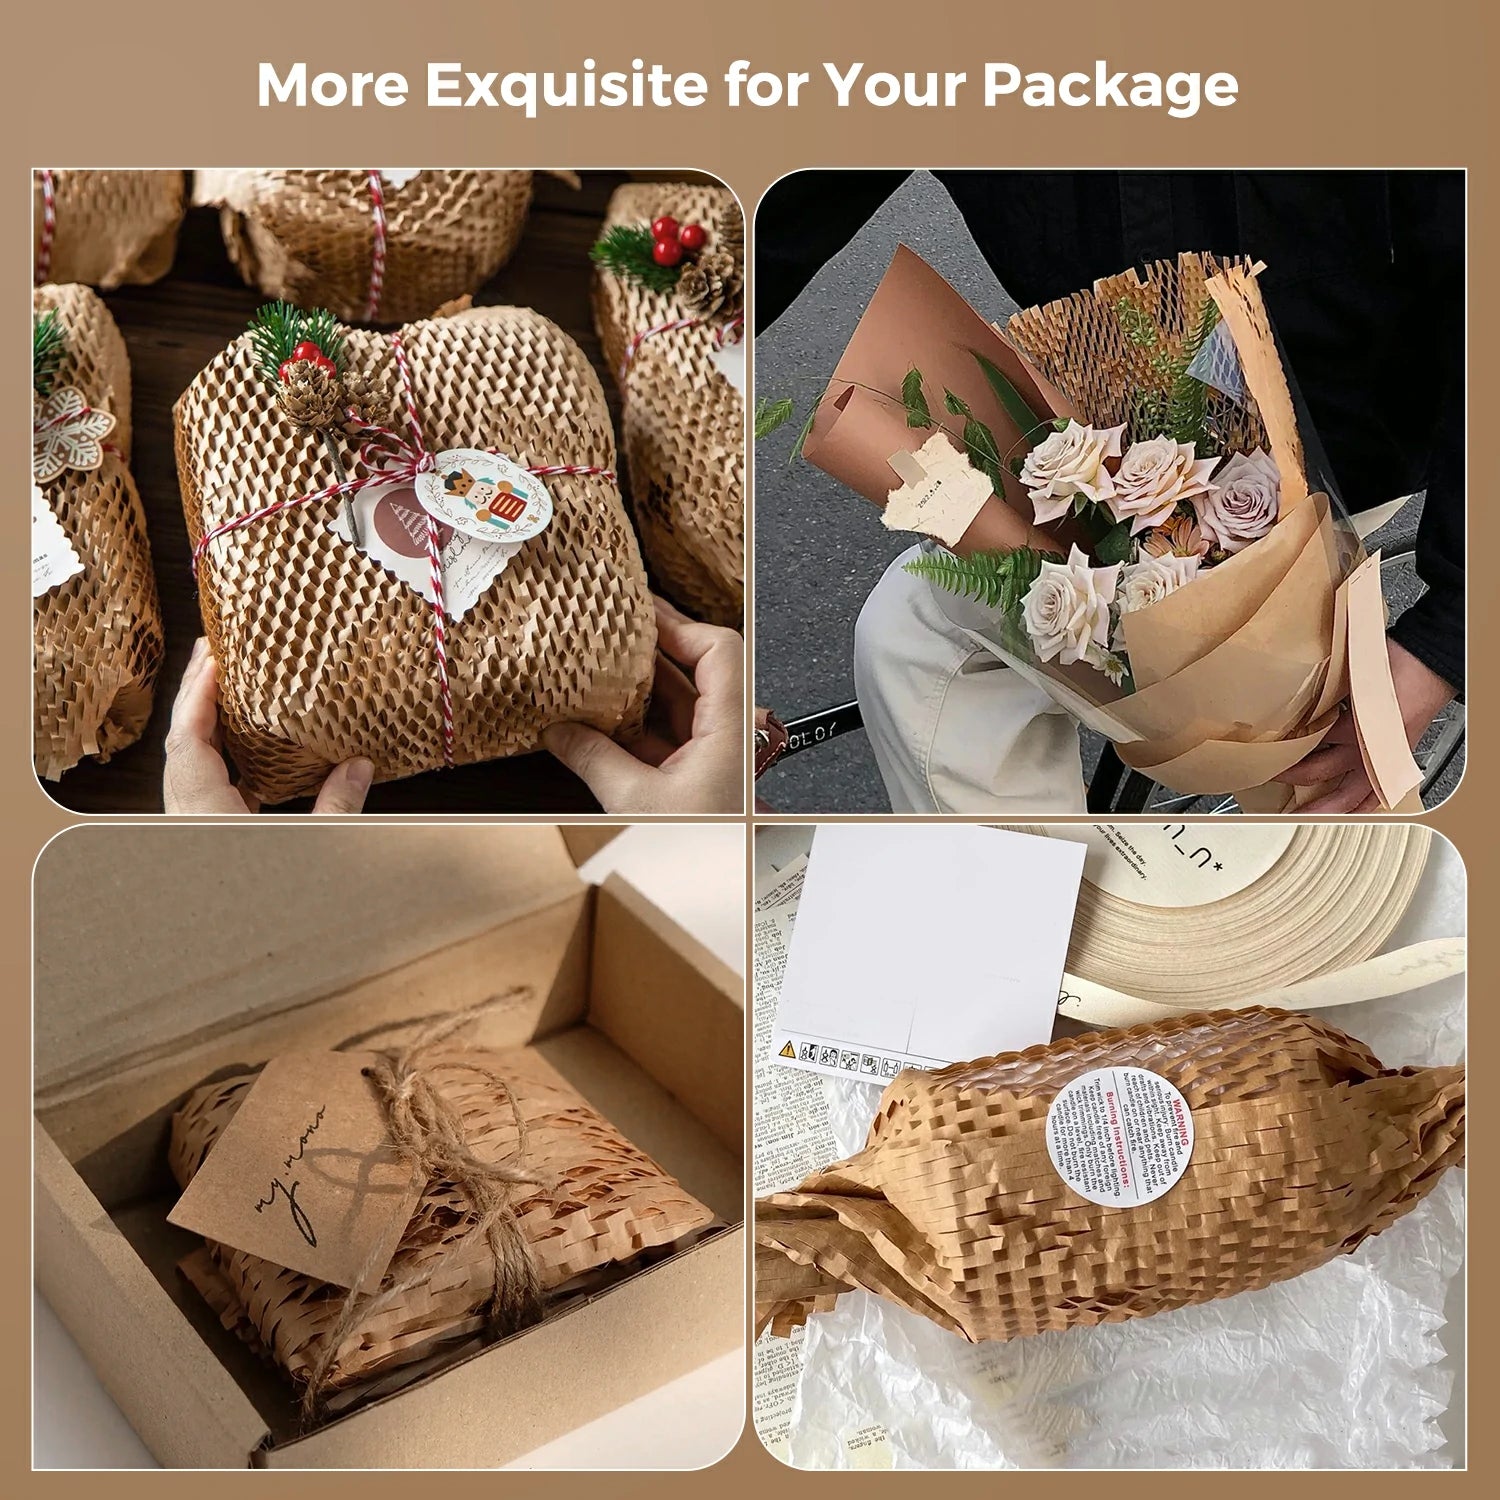 MUNBYN Honeycomb Packing Paper can make your packages look more exquisite.